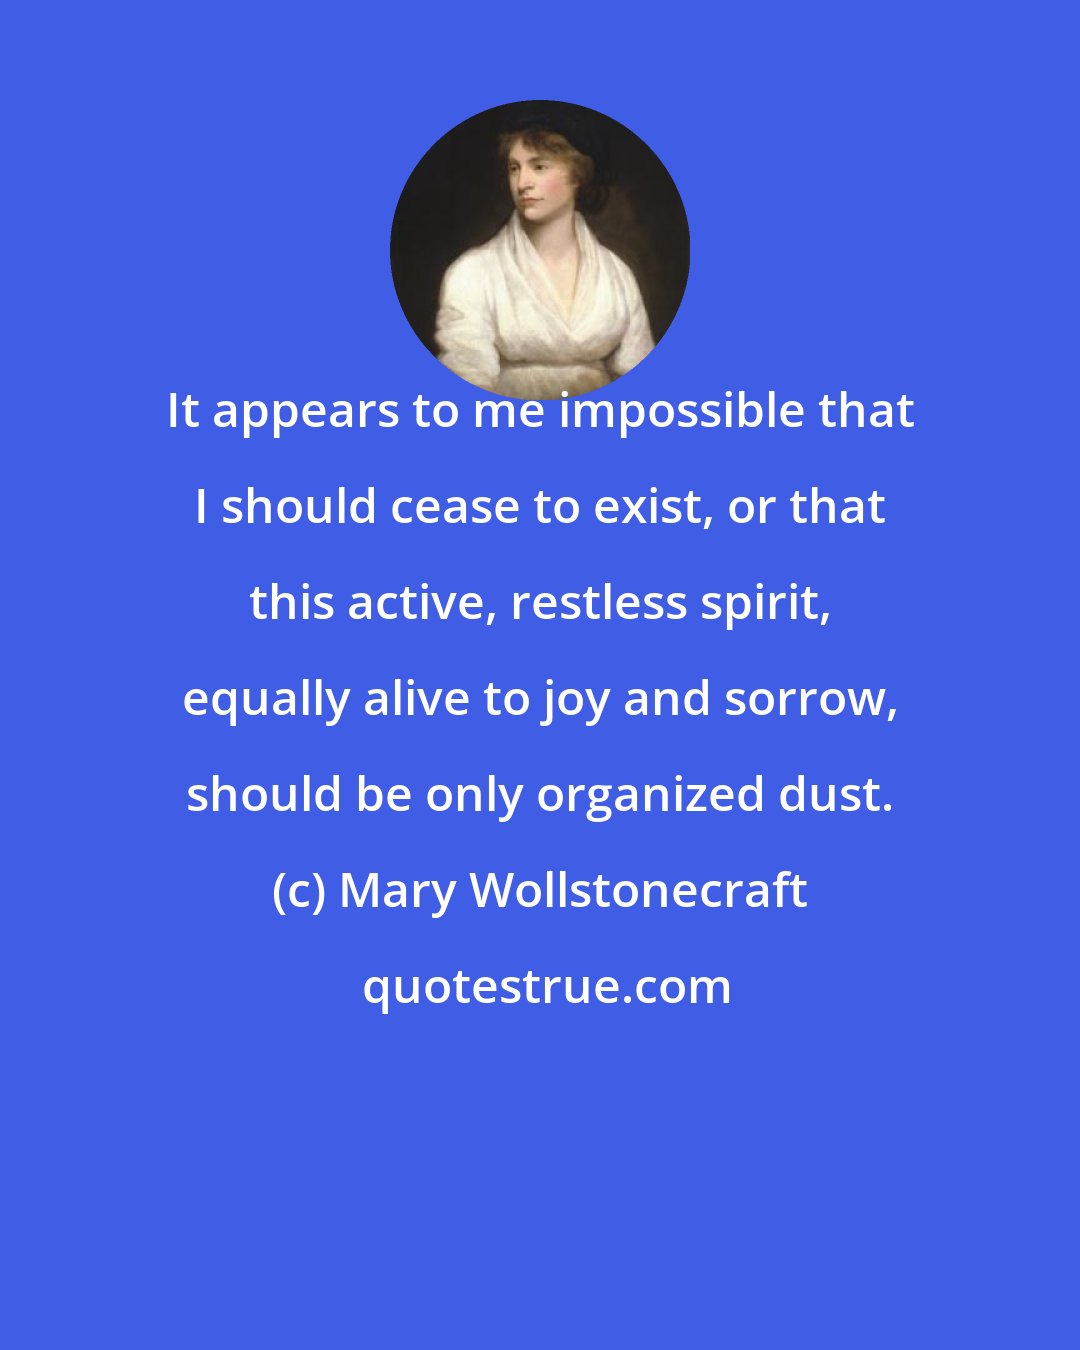 Mary Wollstonecraft: It appears to me impossible that I should cease to exist, or that this active, restless spirit, equally alive to joy and sorrow, should be only organized dust.